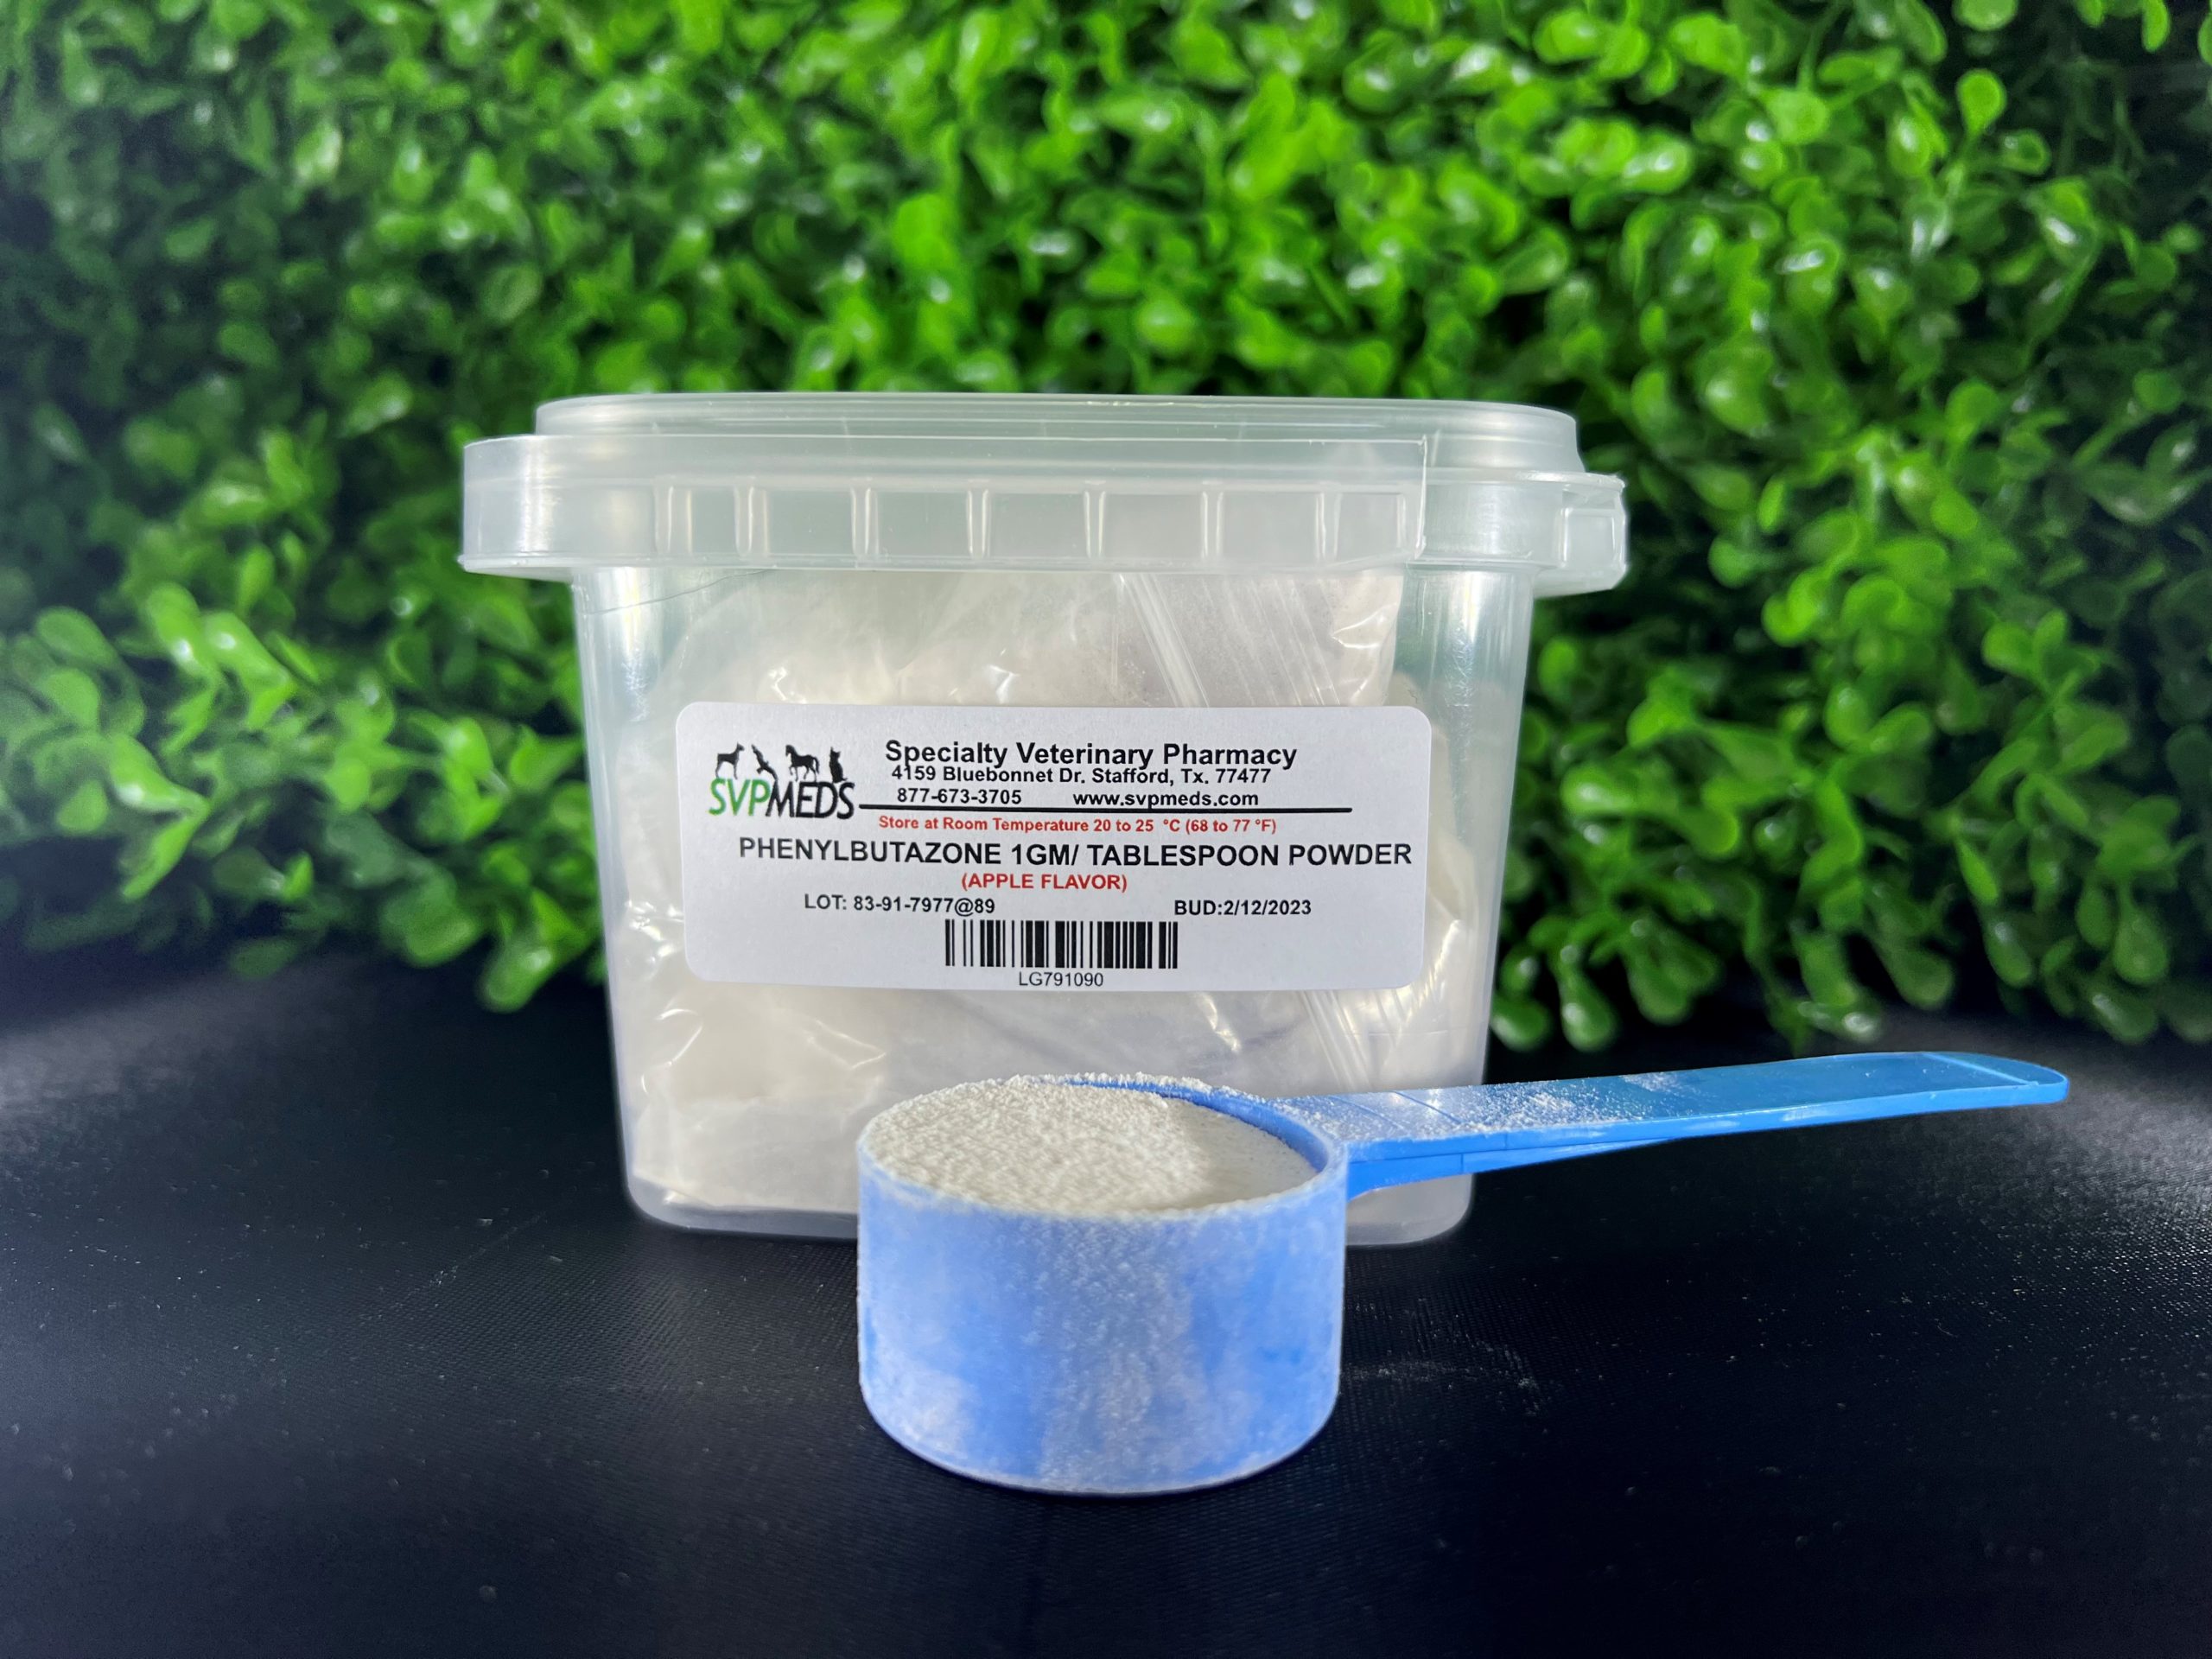 Phenylbutazone Oral Powder compounded for horses